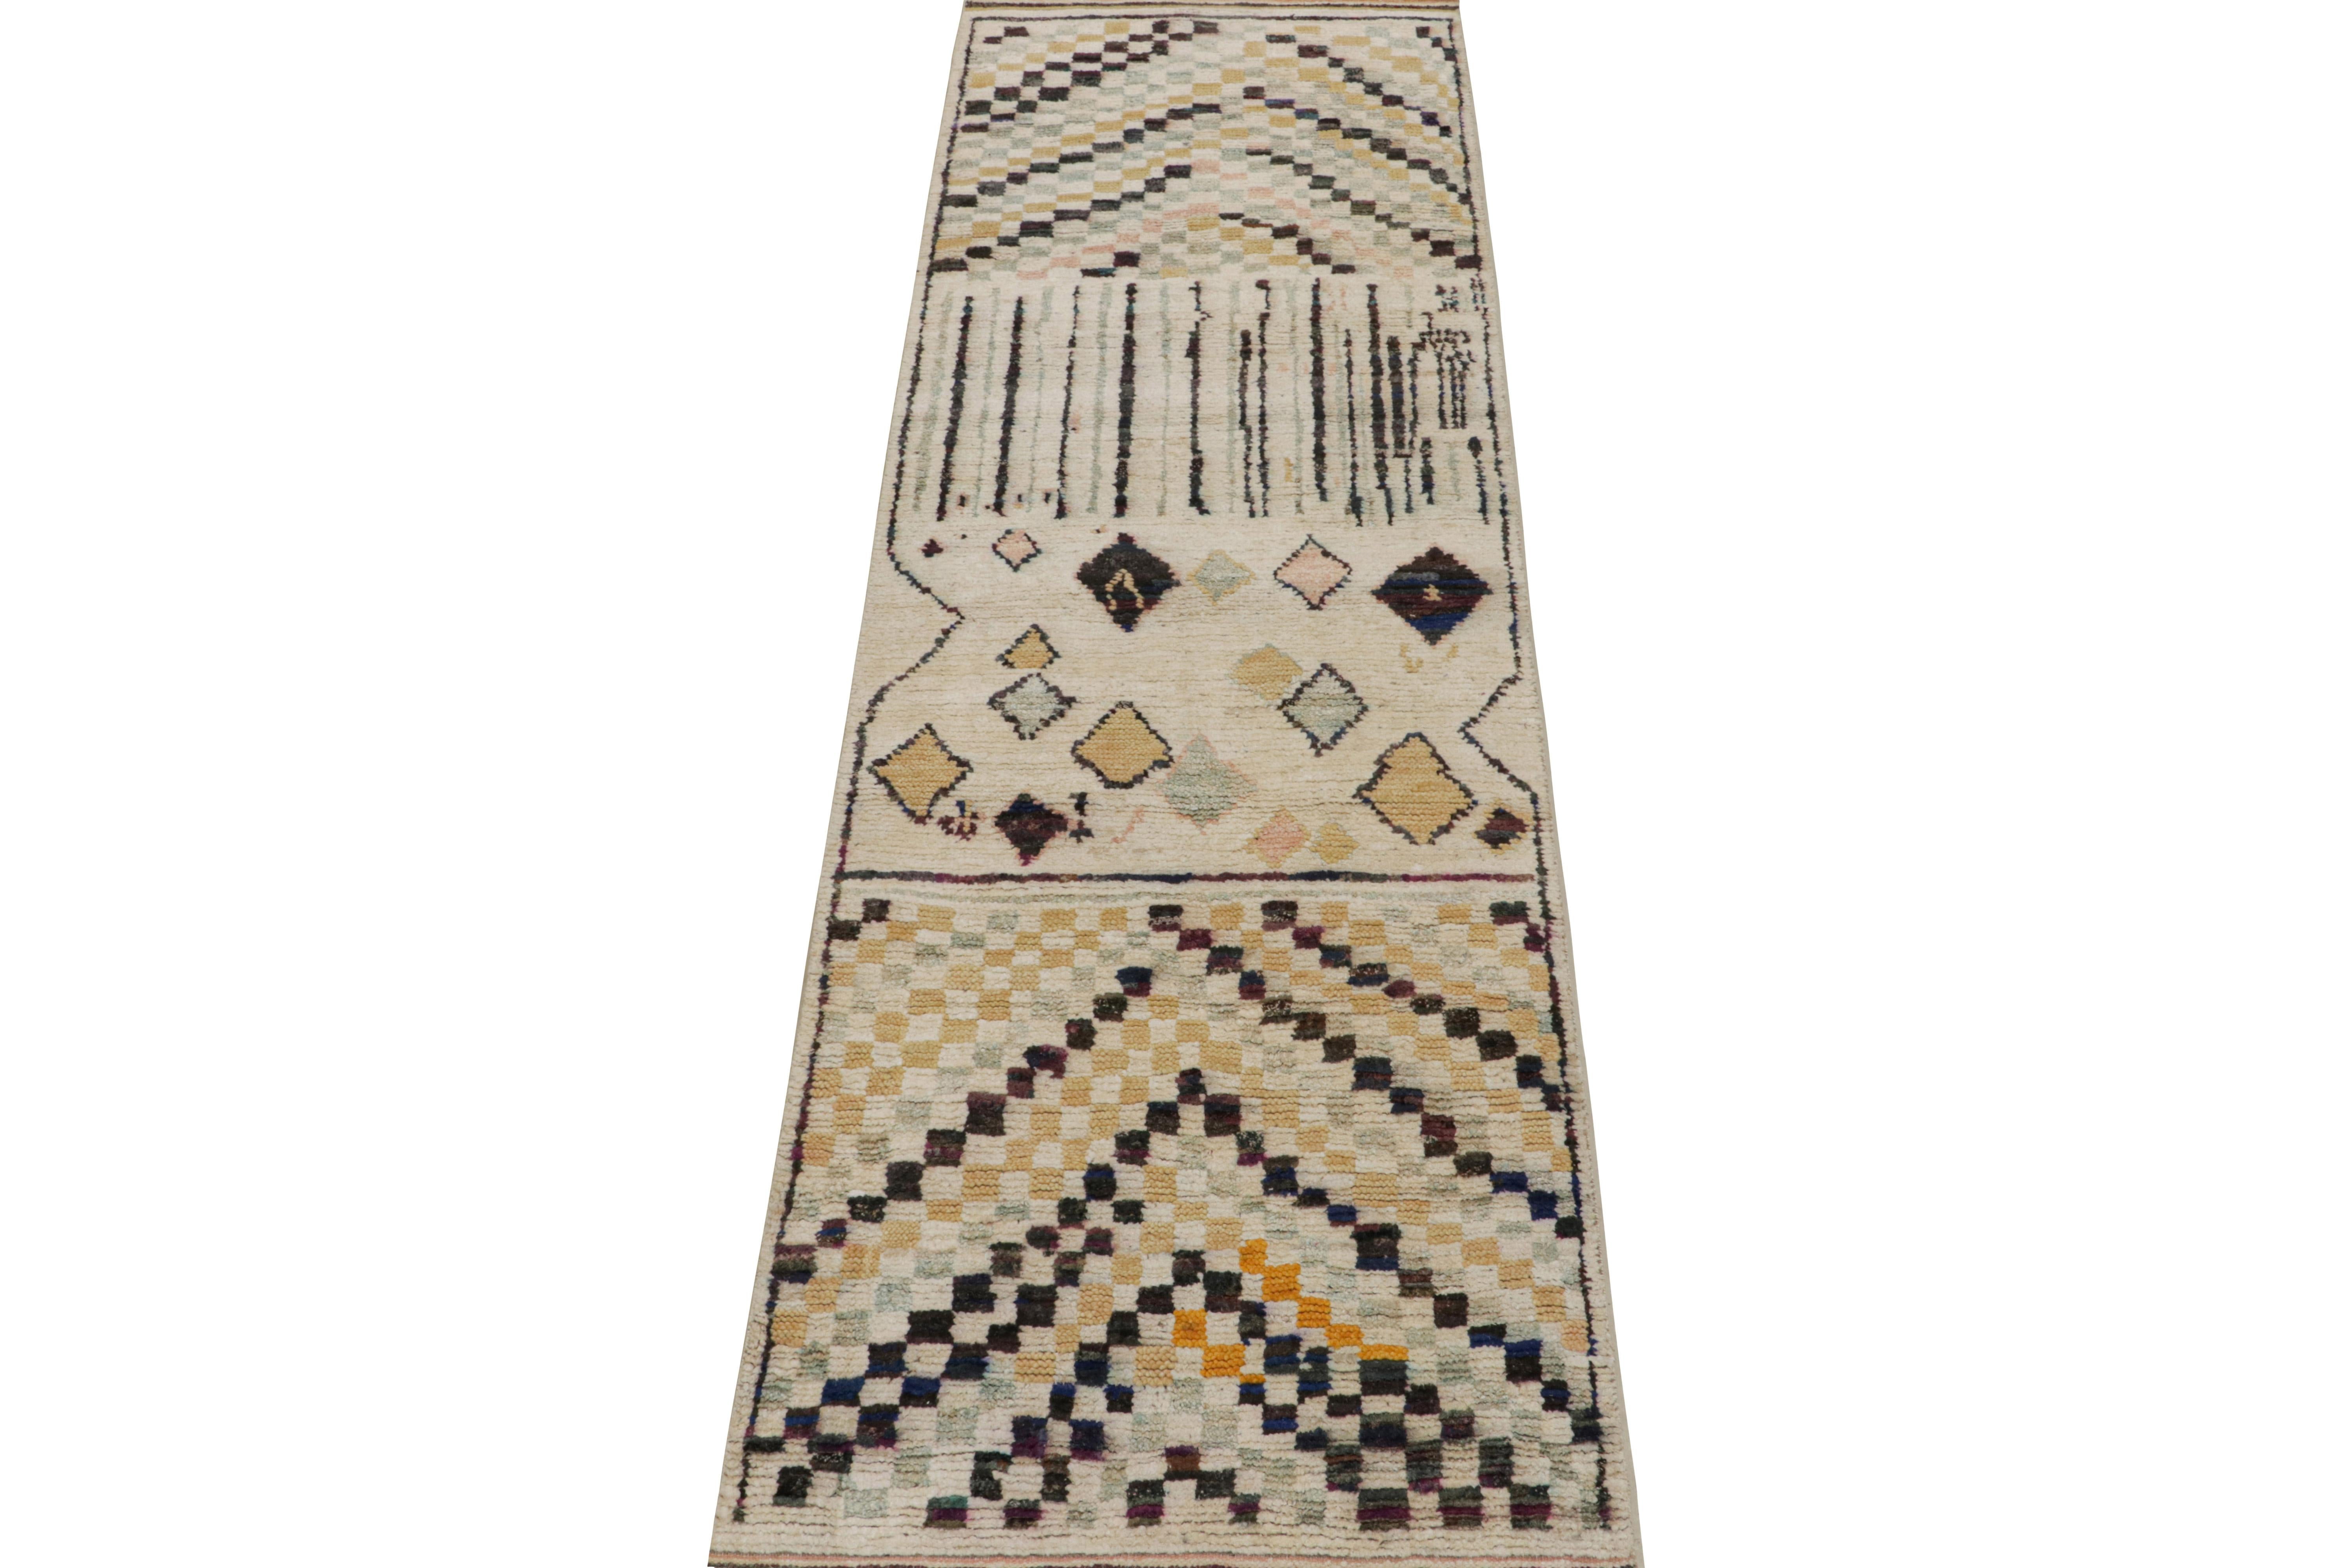 Tribal Rug & Kilim’s Moroccan Style Runner Rug in Beige & Multicolor Geometric Patterns For Sale